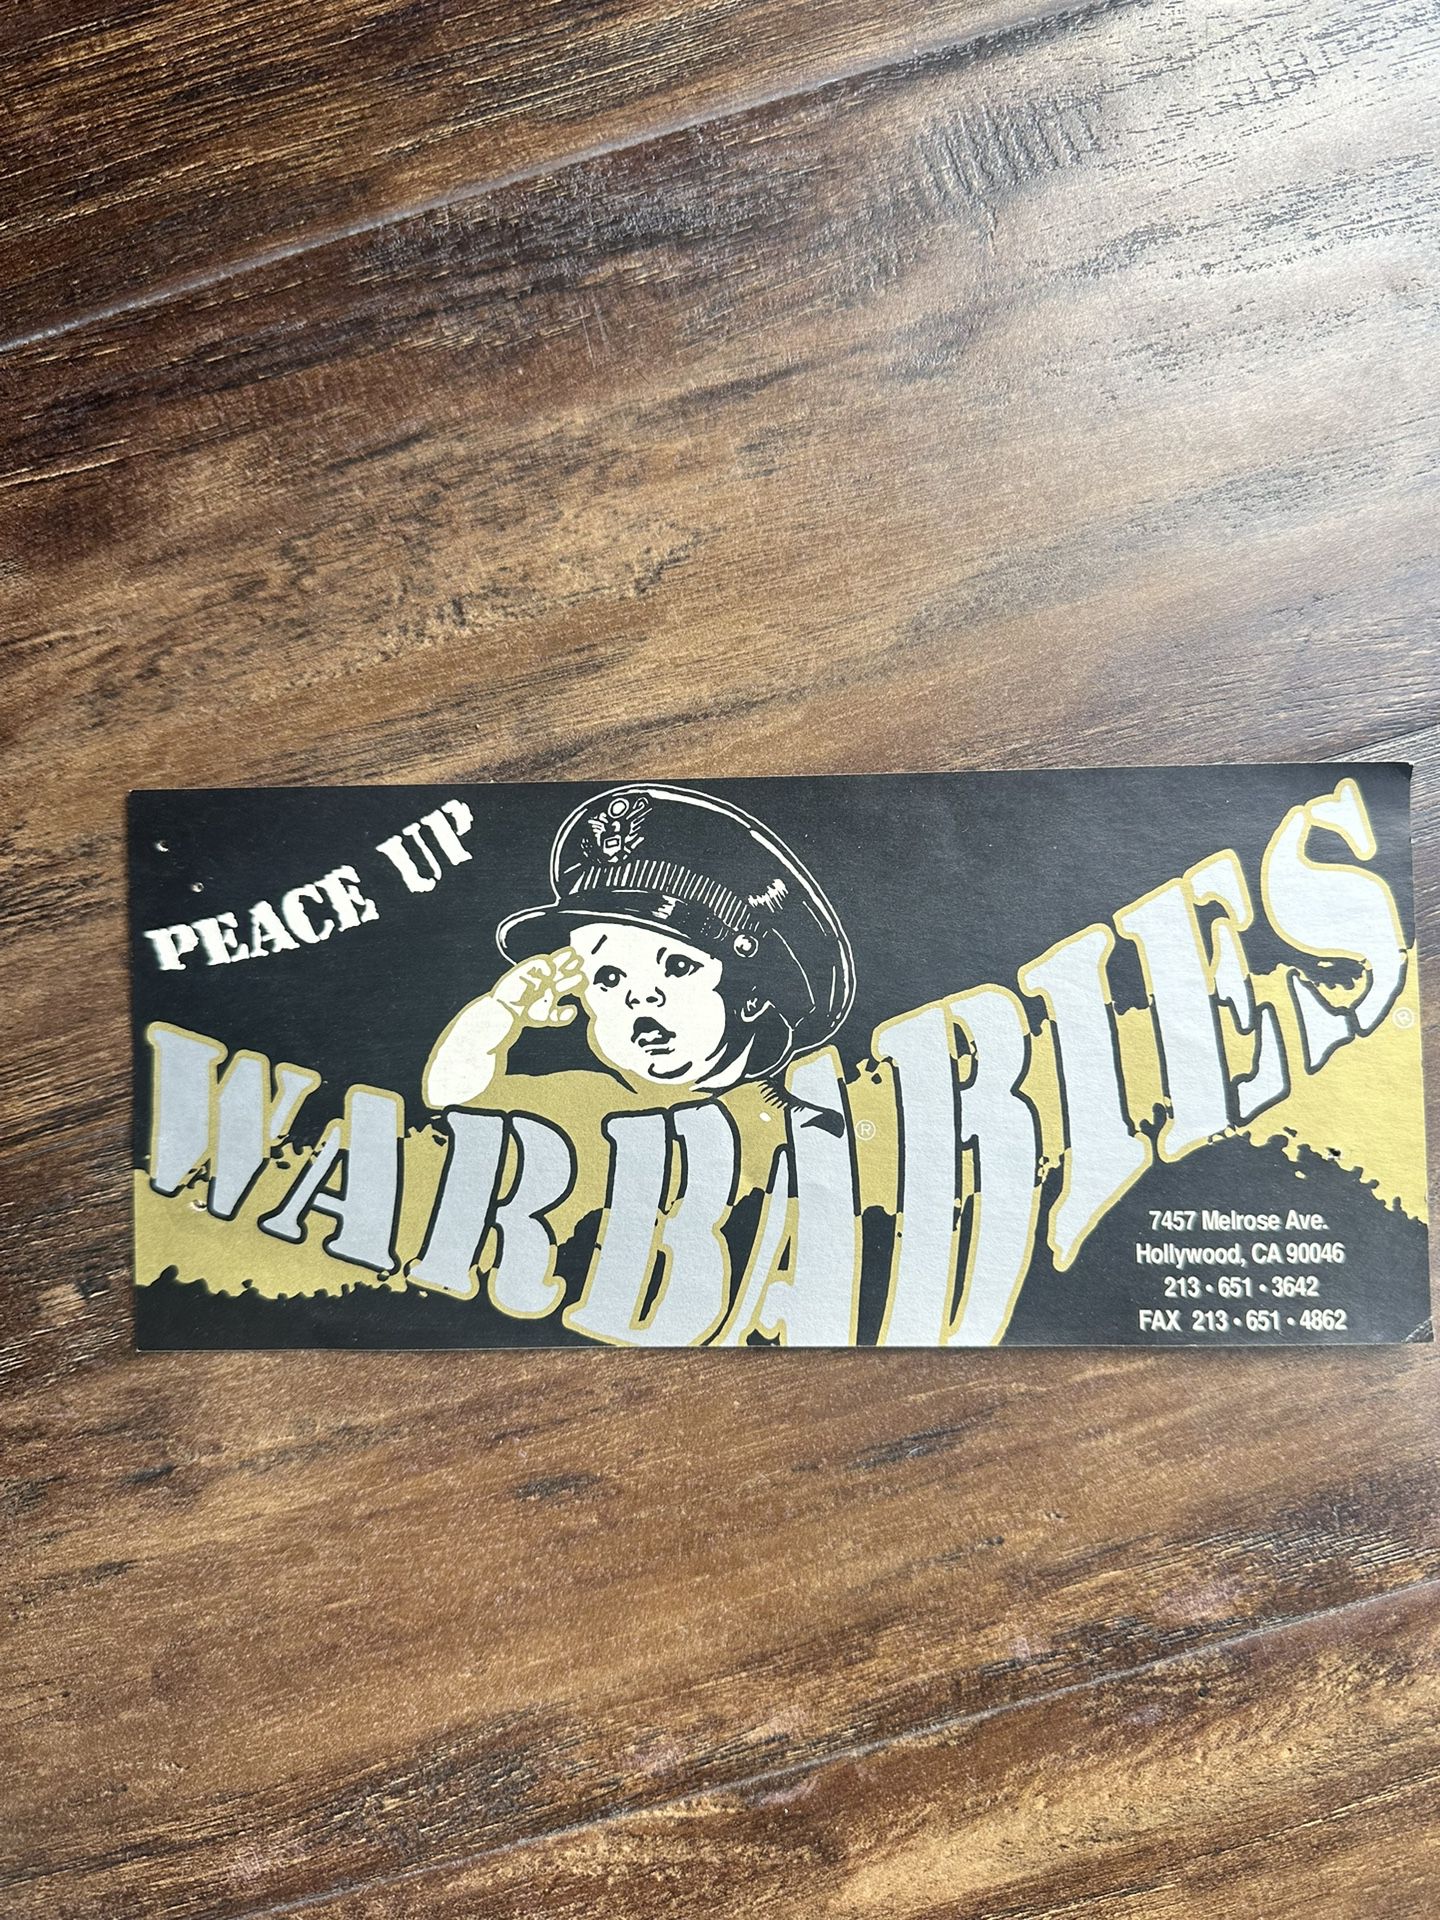 1980’s Melrose Ave. WARBABIES Store Sticker - FREE! Will Mail For FREE! 